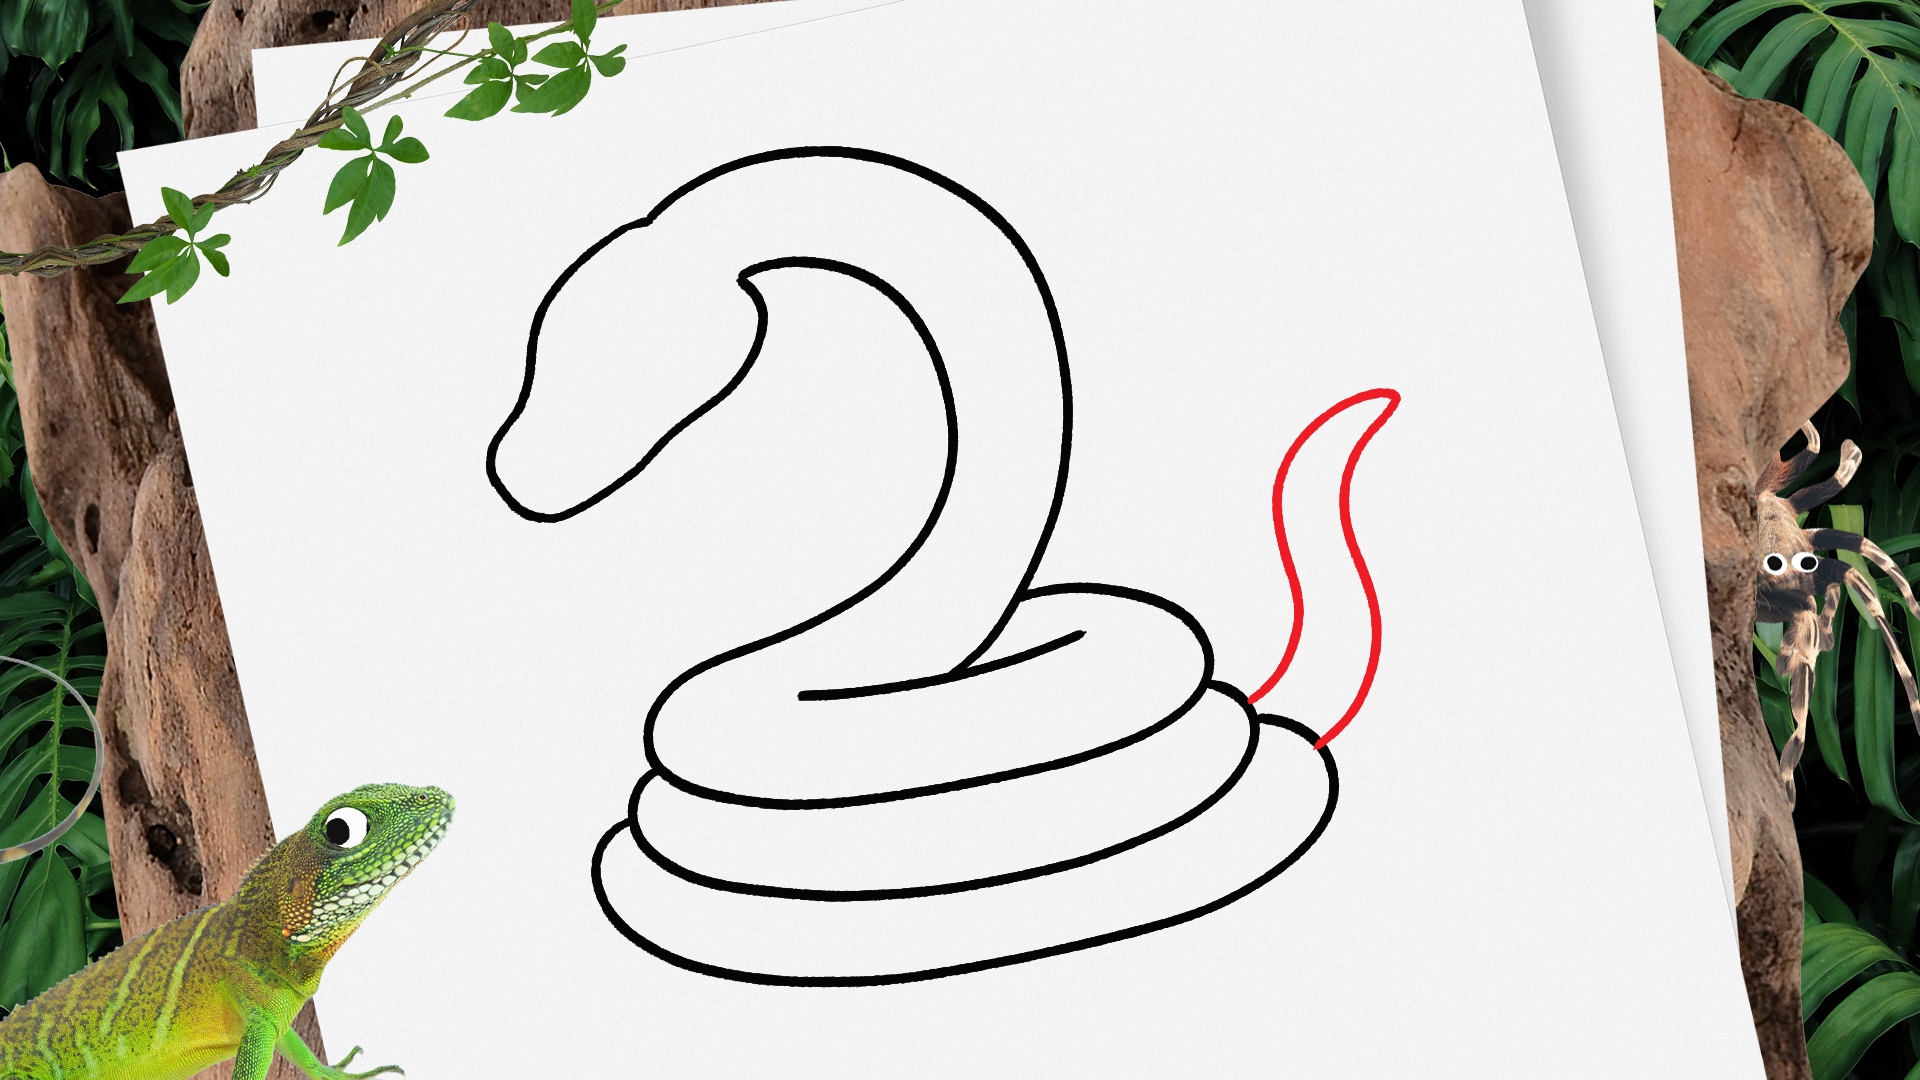 how to draw a snake